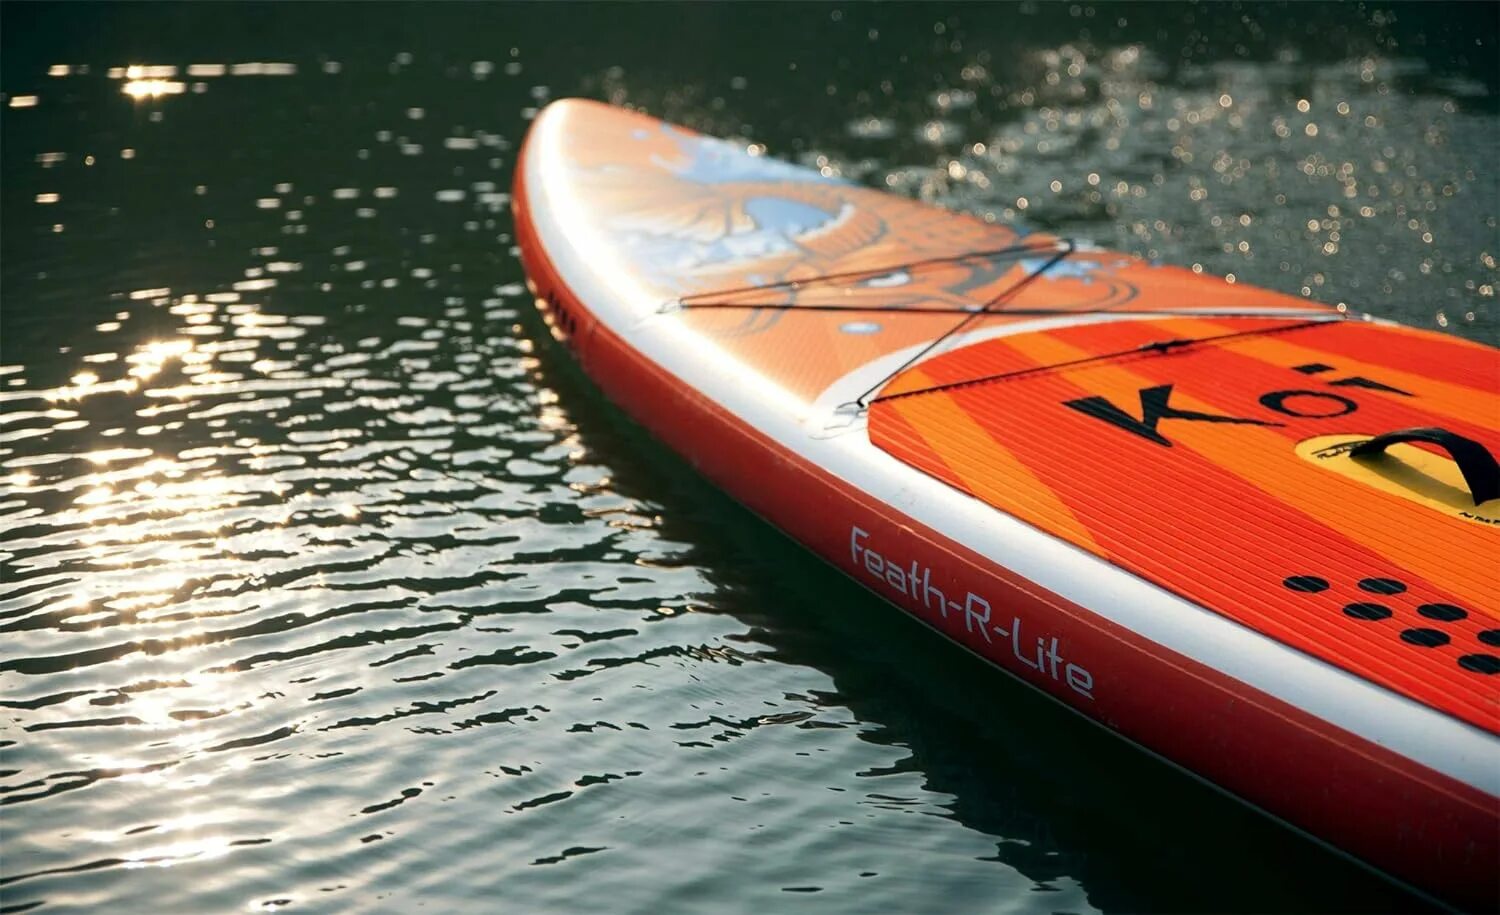 Feath r lite. FUNWATER 11.6 sup. Sup Board Koi 11.6. Sup доска FUNWATER. FUNWATER Koi 11.6.